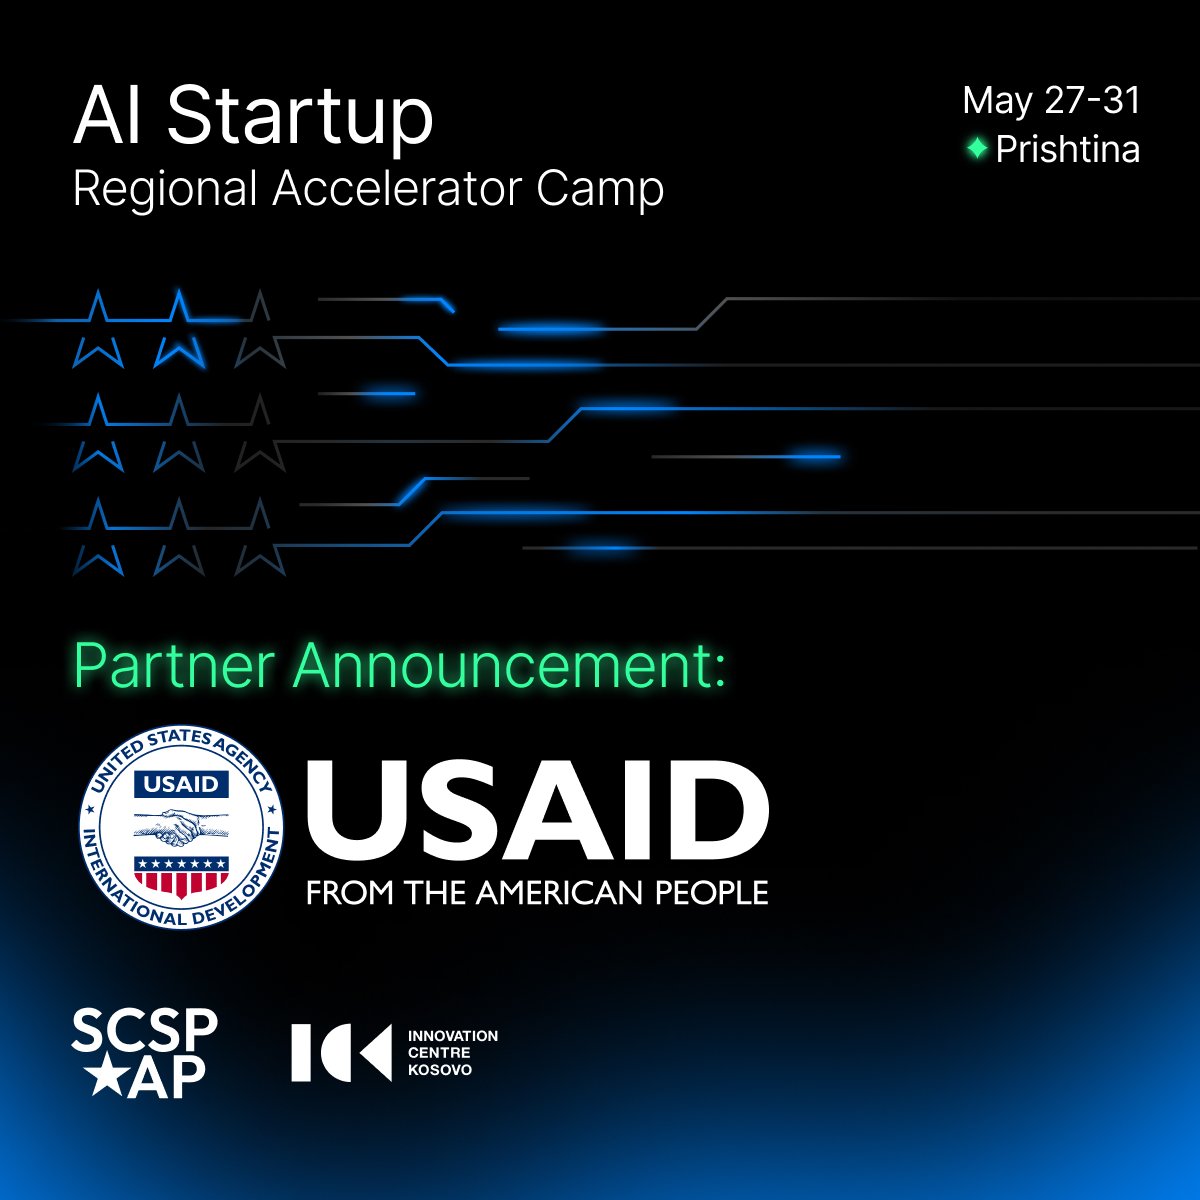 We have some great news to share 🥳 @USAIDKosovo Compete Activity is now officially one of the key partners for our joint 'AI Startup Regional Accelerator Camp' with the Special Competitive Studies Project - @scsp_ai

Thank you for your support and partnership.